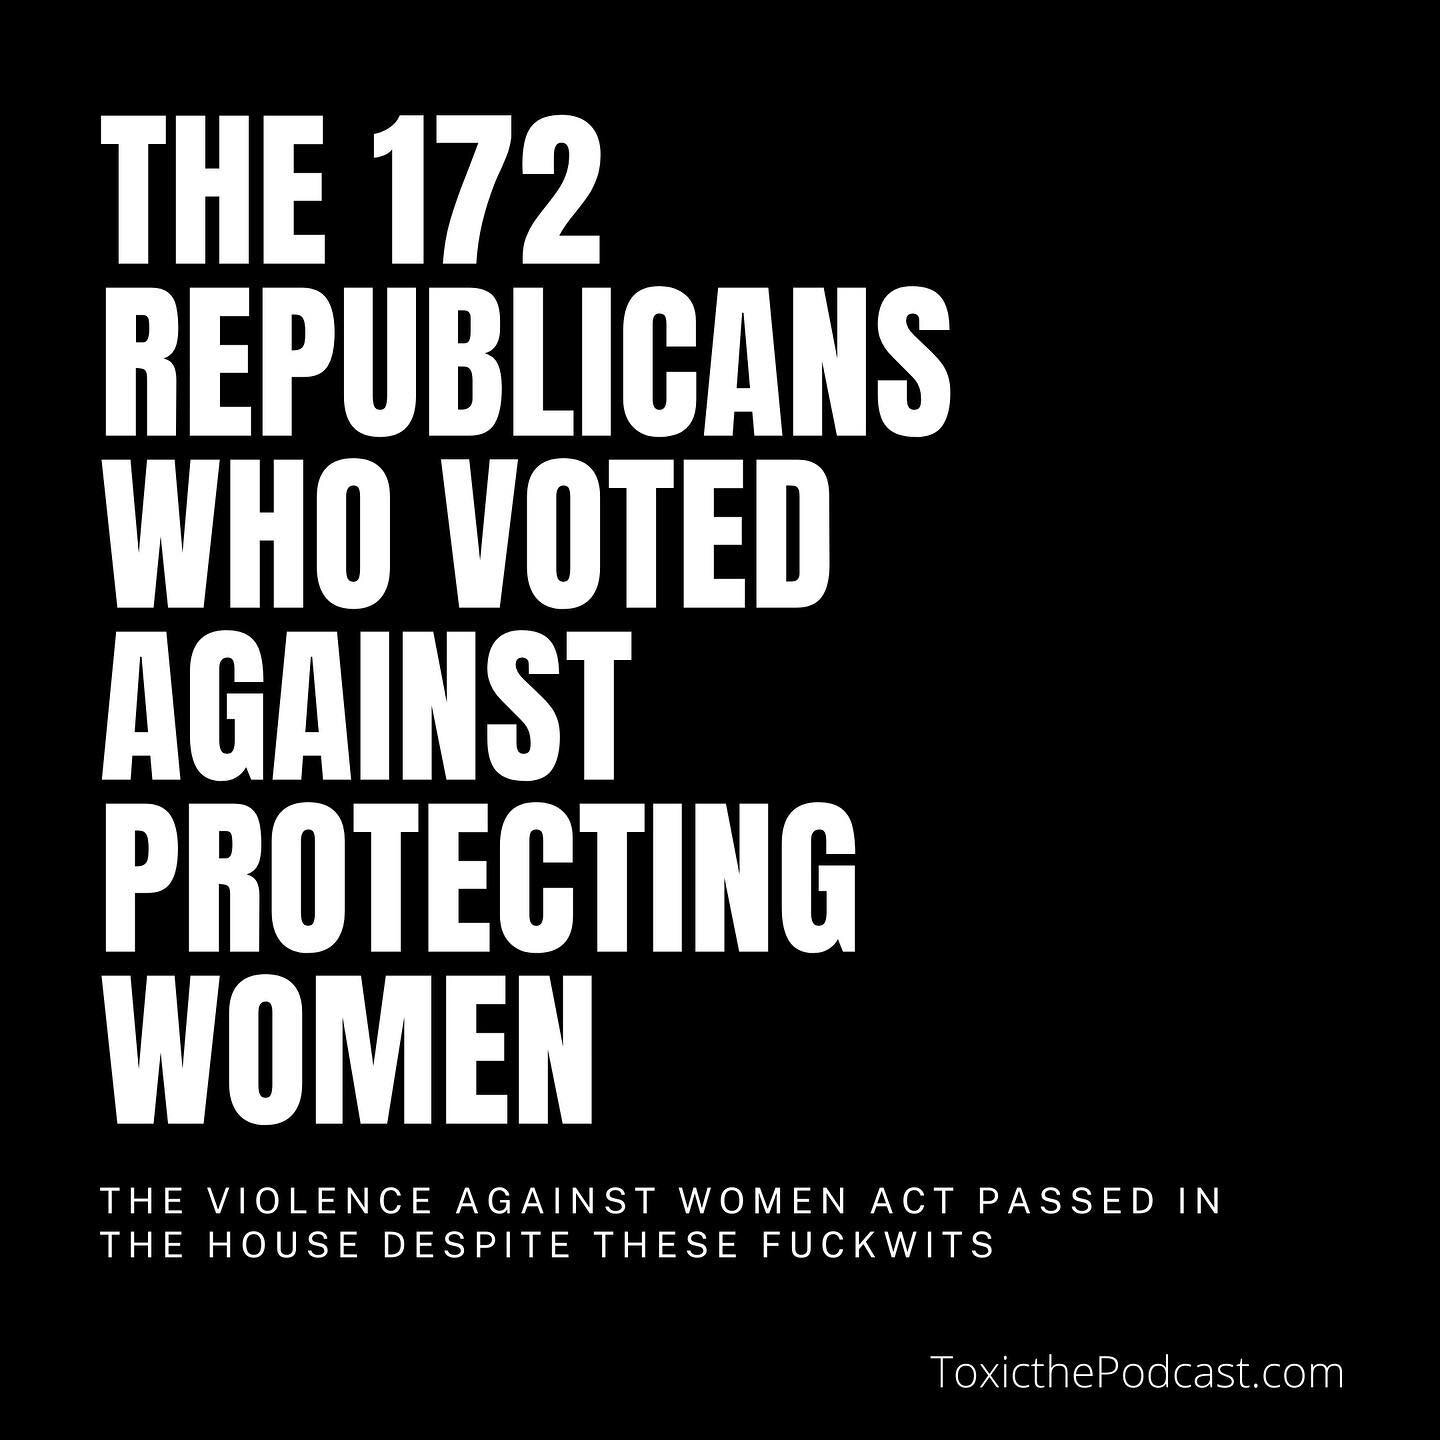 On Wednesday night, the renewal of the Violence against Women Act passed in the House, 244-172. It provides protections and resources for victims of domestic violence and sexual assault. However, these 172 Republicans didn&rsquo;t want to protect wom